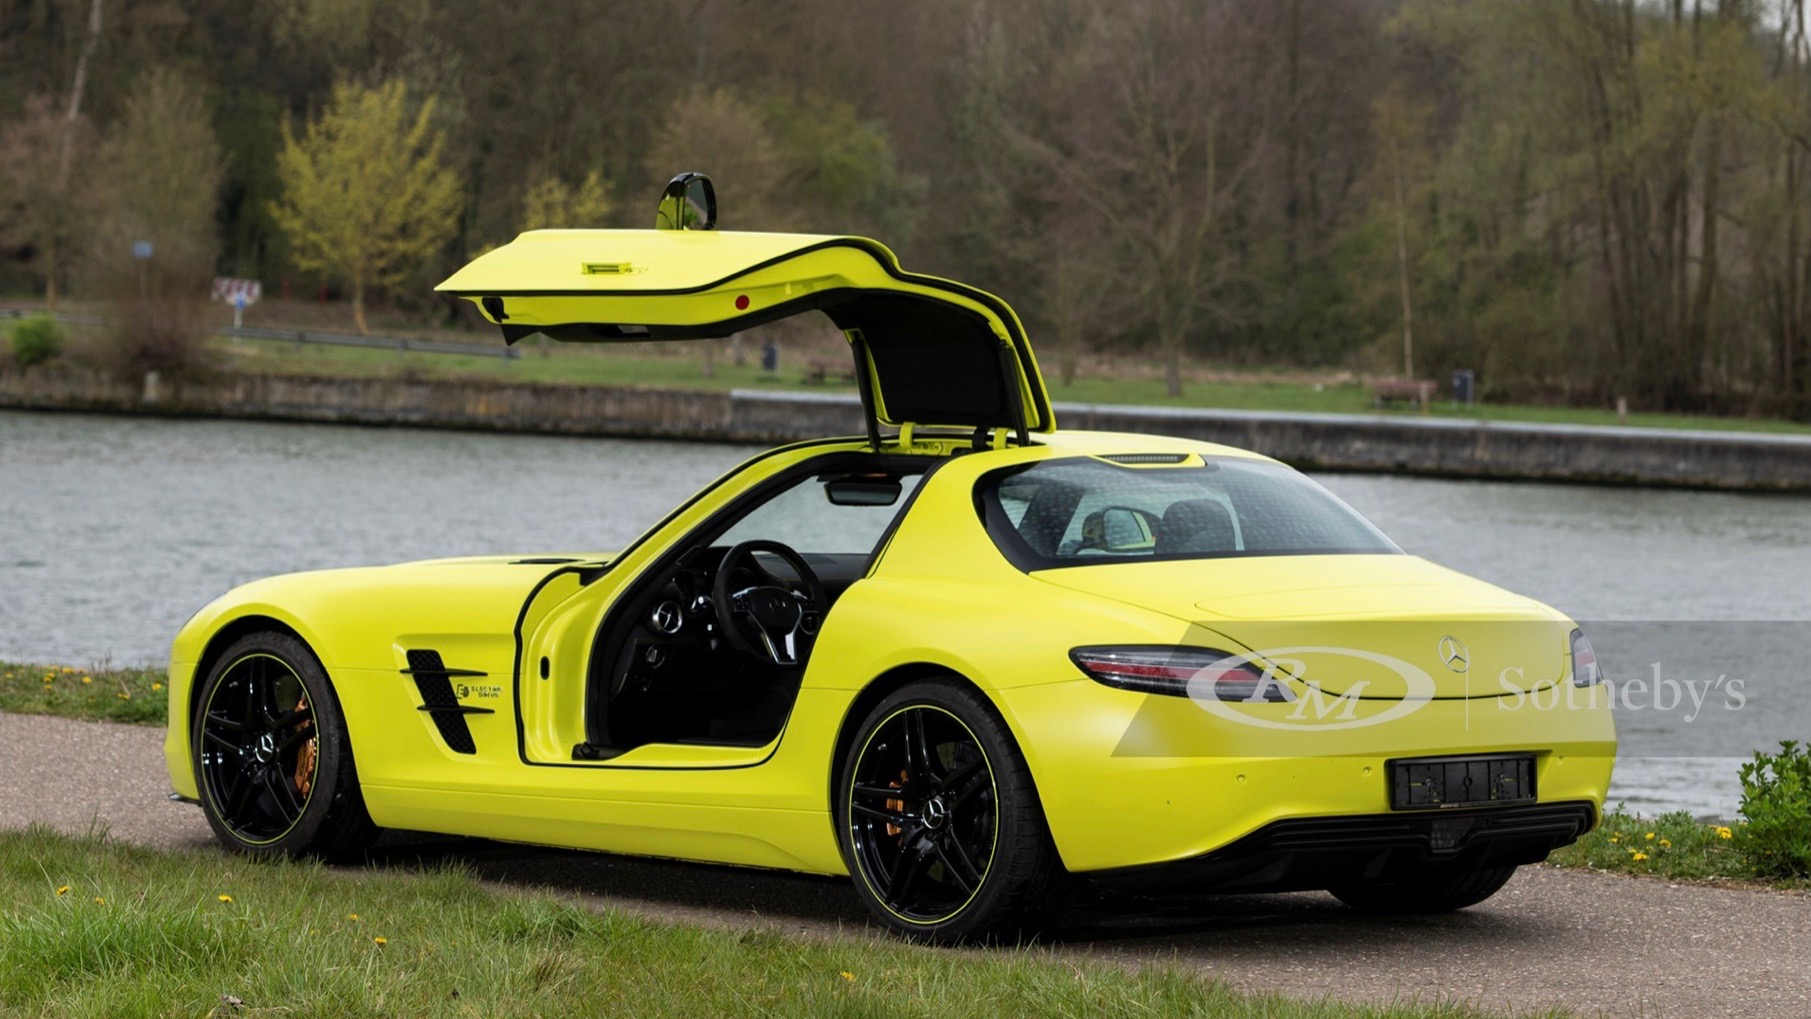 2013 Mercedes-Benz SLS AMG Electric Drive (Photo by RM Sotheby's)